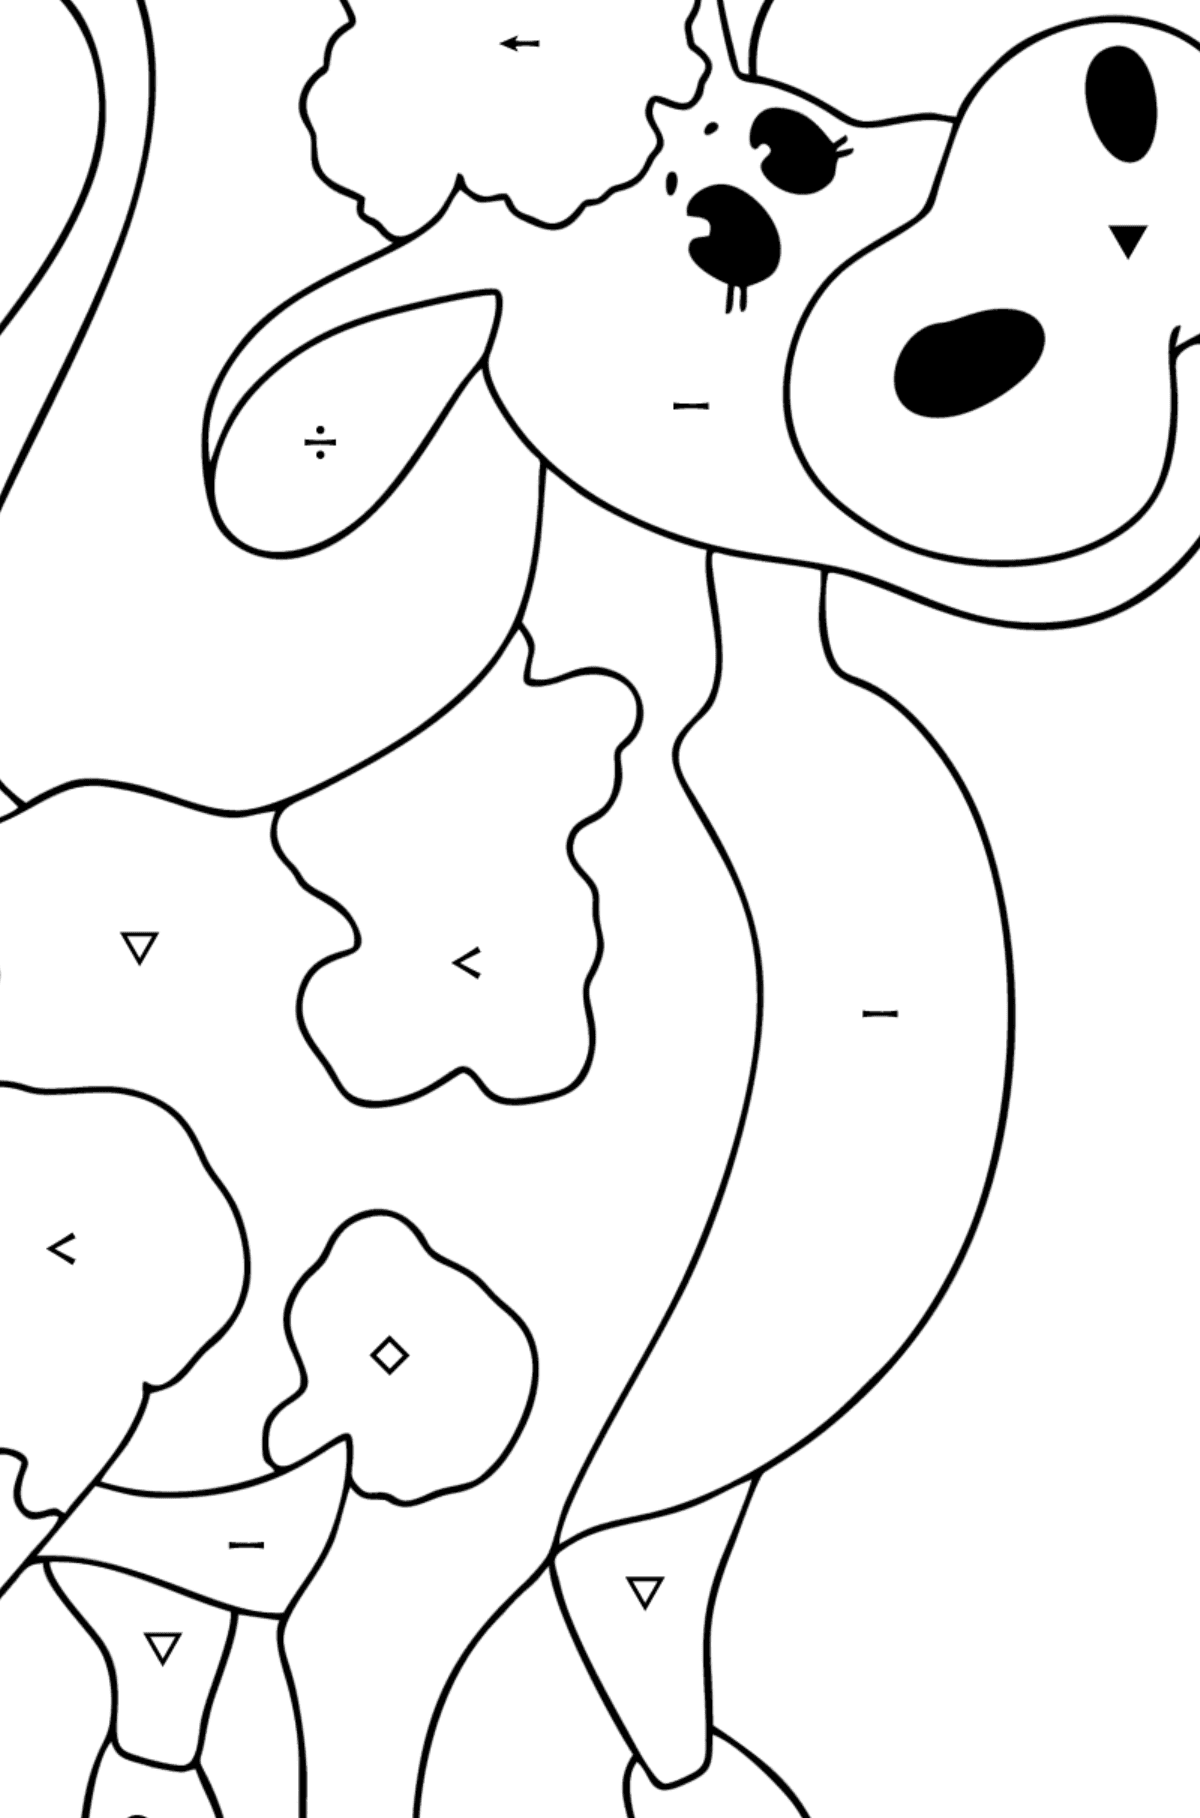 Baby cow coloring pages - Coloring by Symbols for Kids